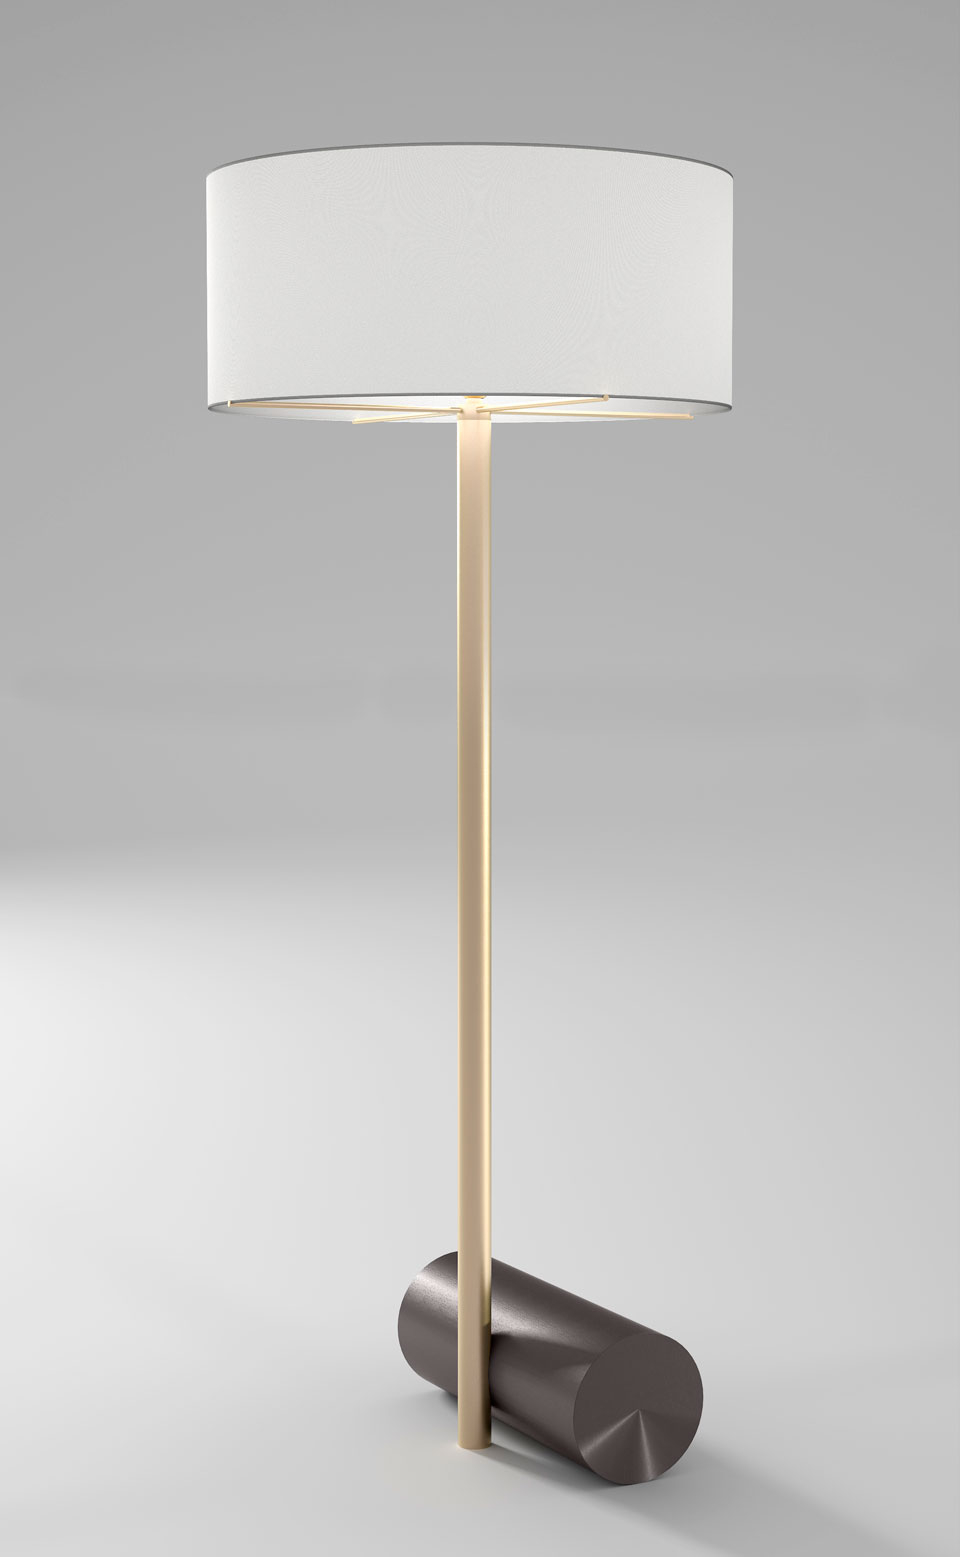 Cale Floor Lamp Graphite Base Satin Brass Foot And Cylindrical Shade In White Percaline Dimmer regarding measurements 960 X 1557